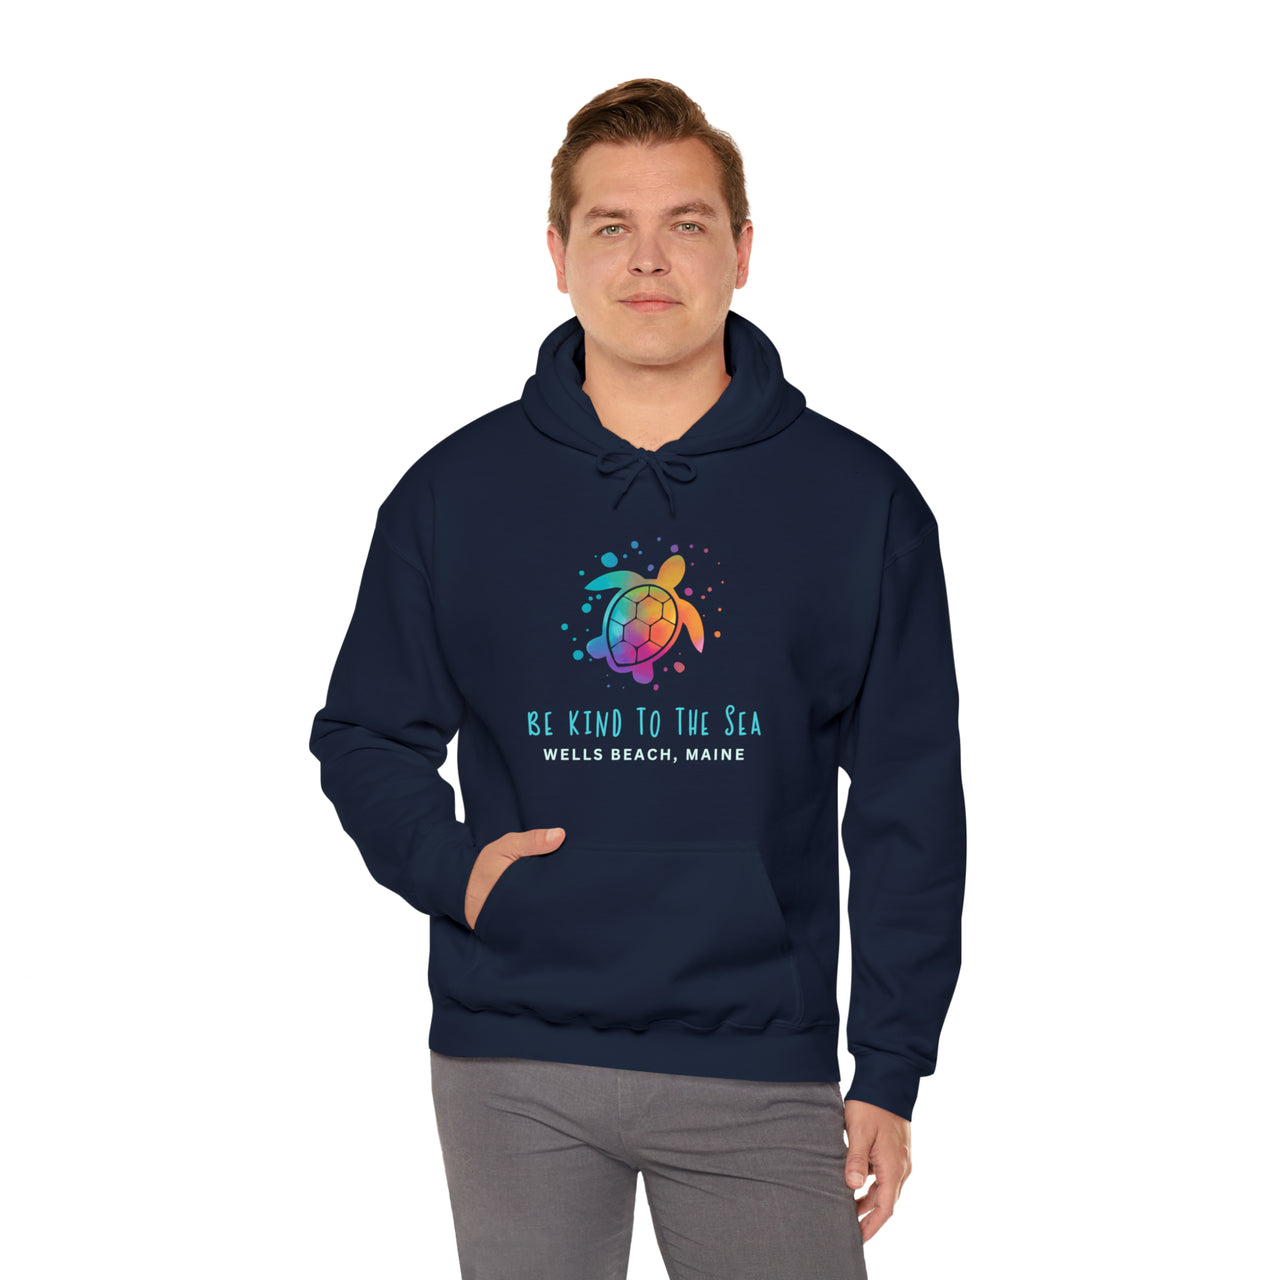 Be Kind To The Sea Personalized Heavy Blend Navy Hooded Sweatshirt